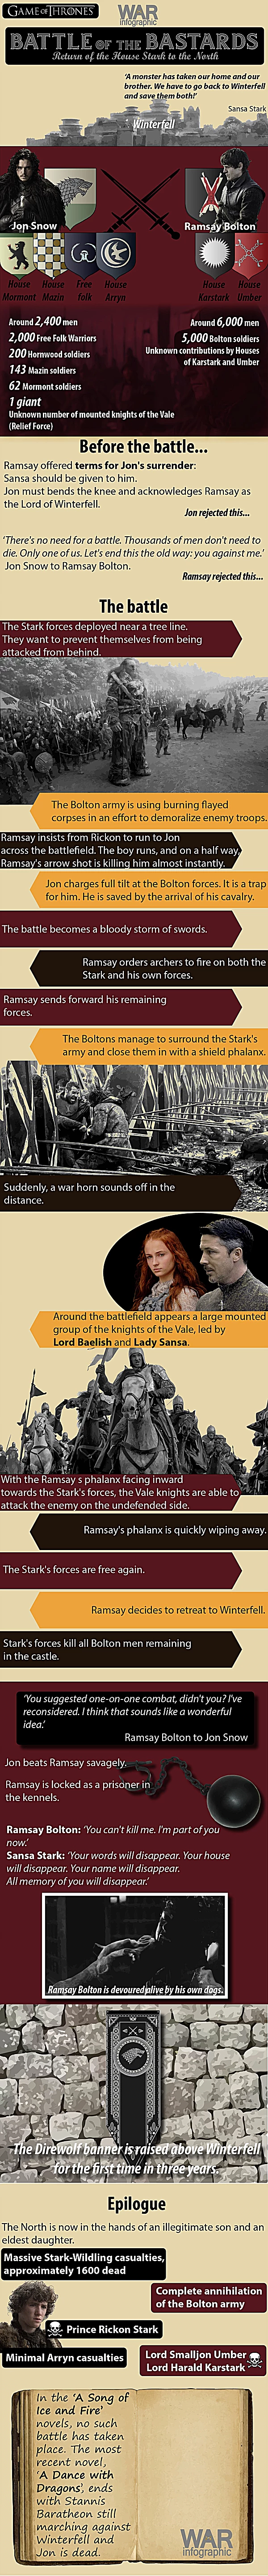 Battle of the bastards in Game of Thrones